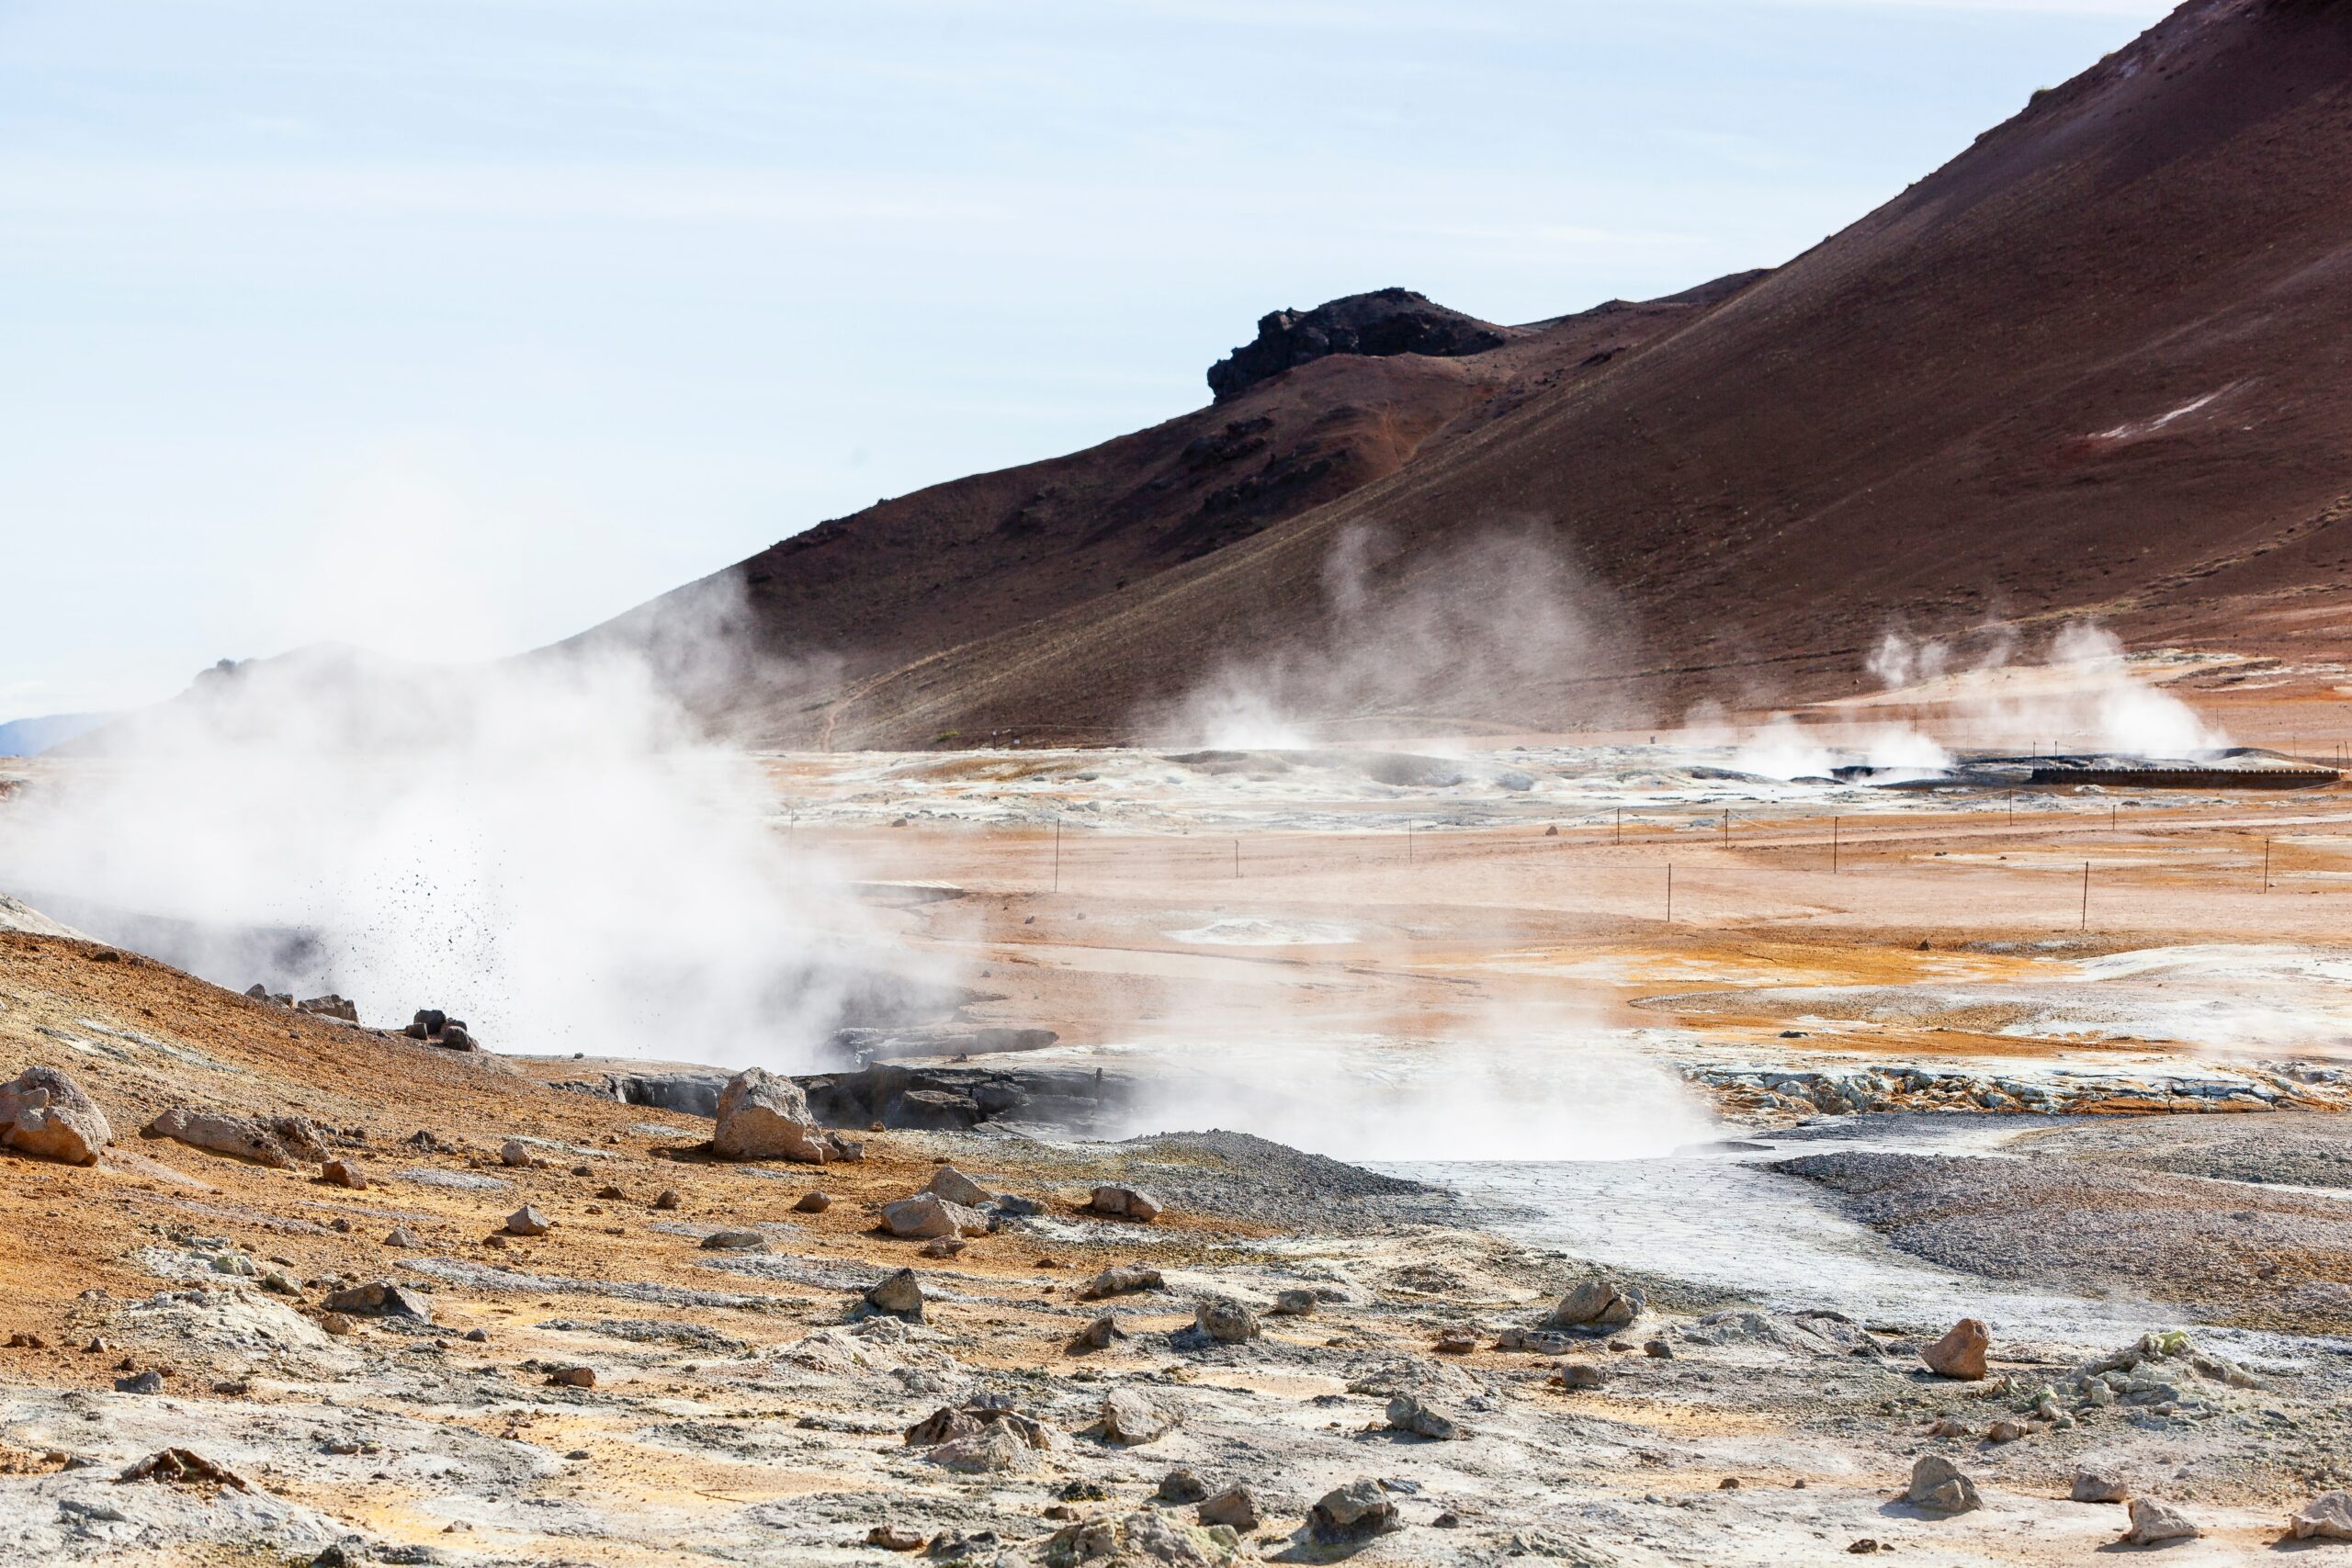 geothermal smoke coming from the ground against a mountain in Iceland